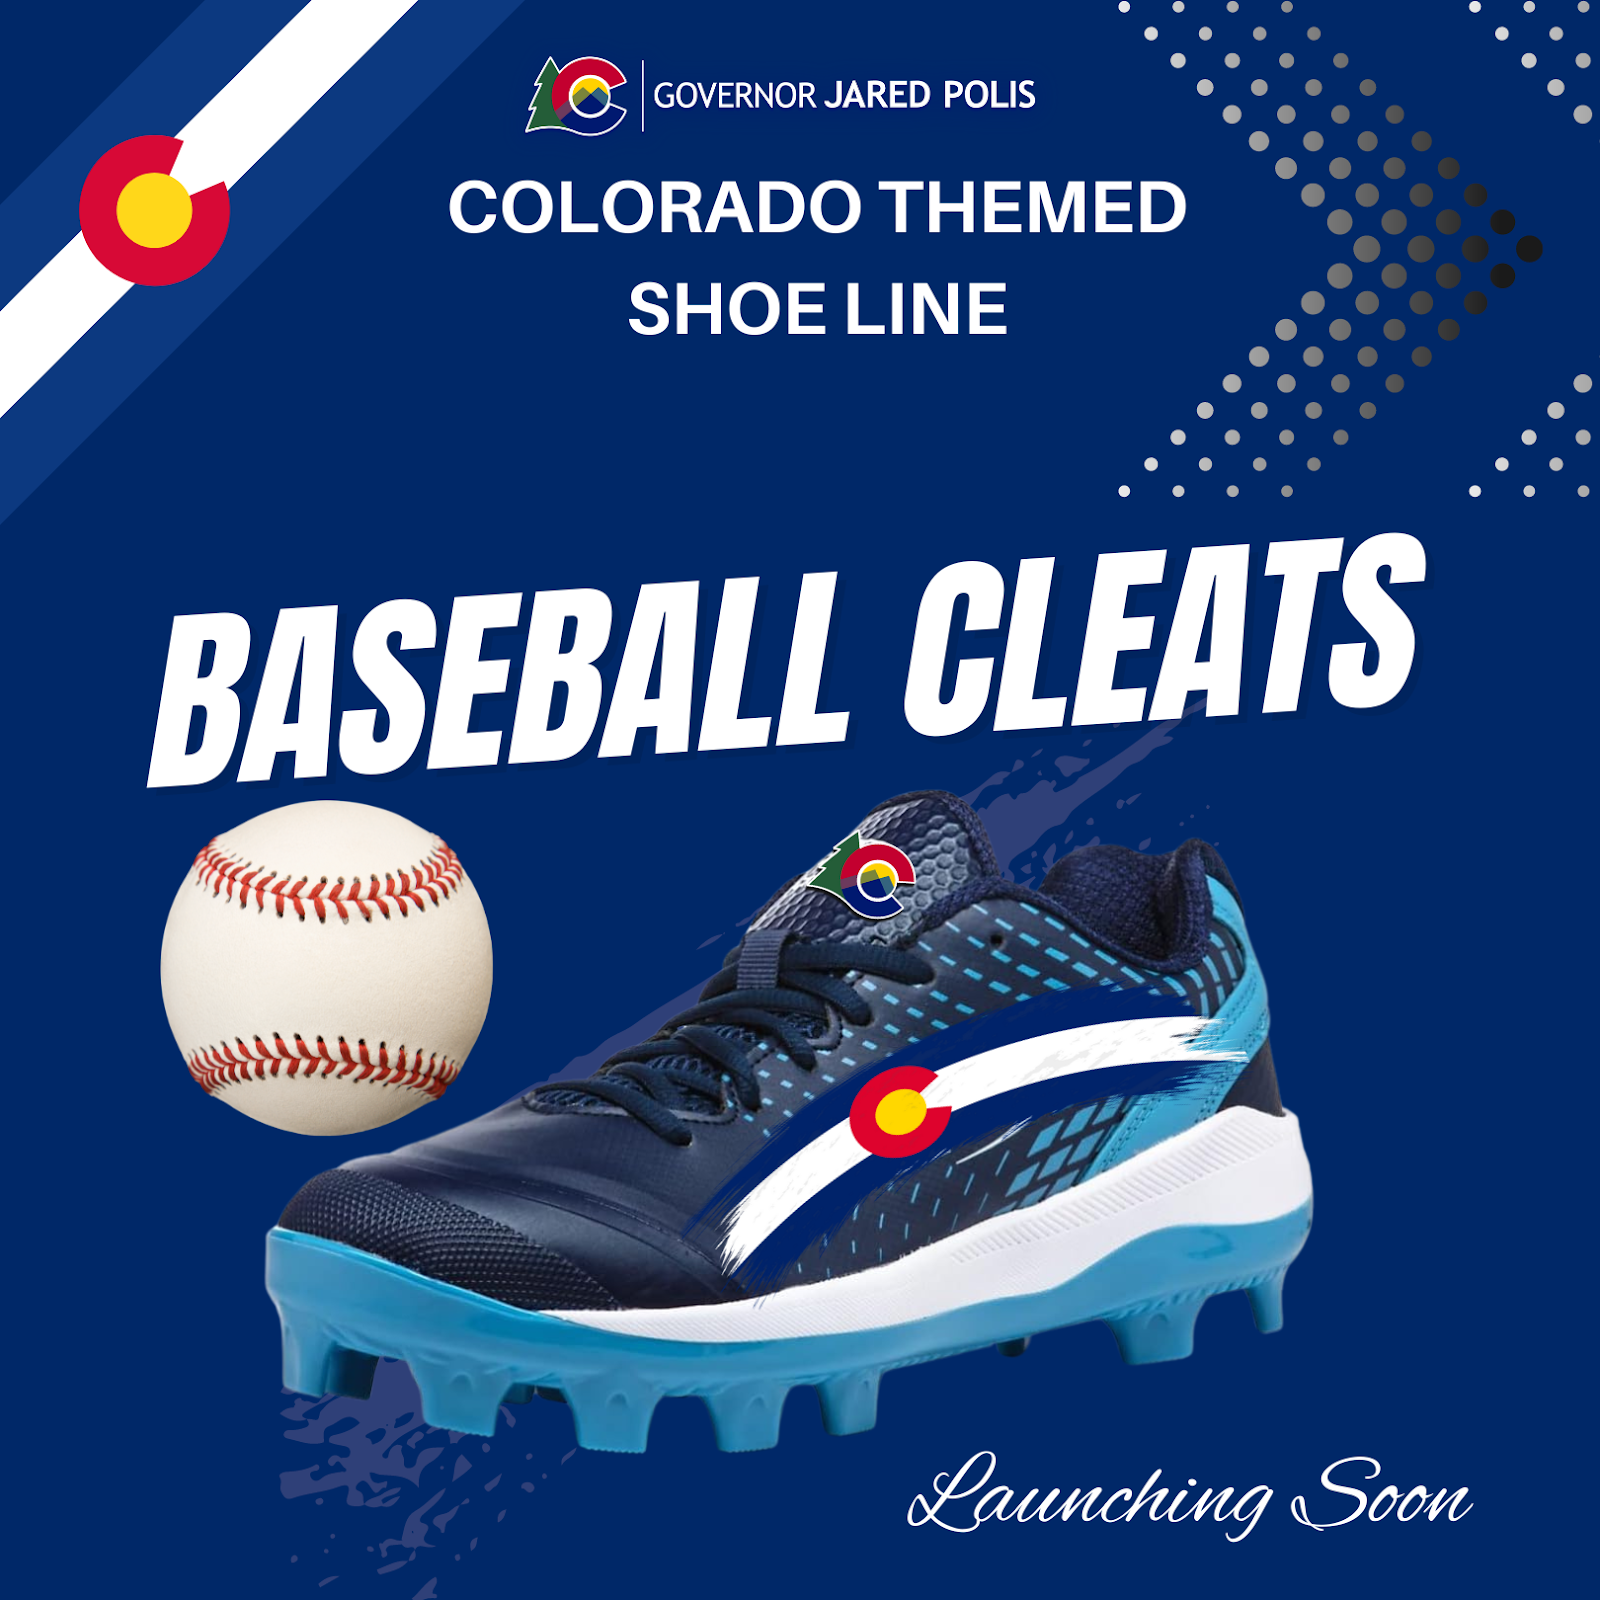 Colorado-themed shoe line. Blue Baseball cleats with white color accents and Colorado logo